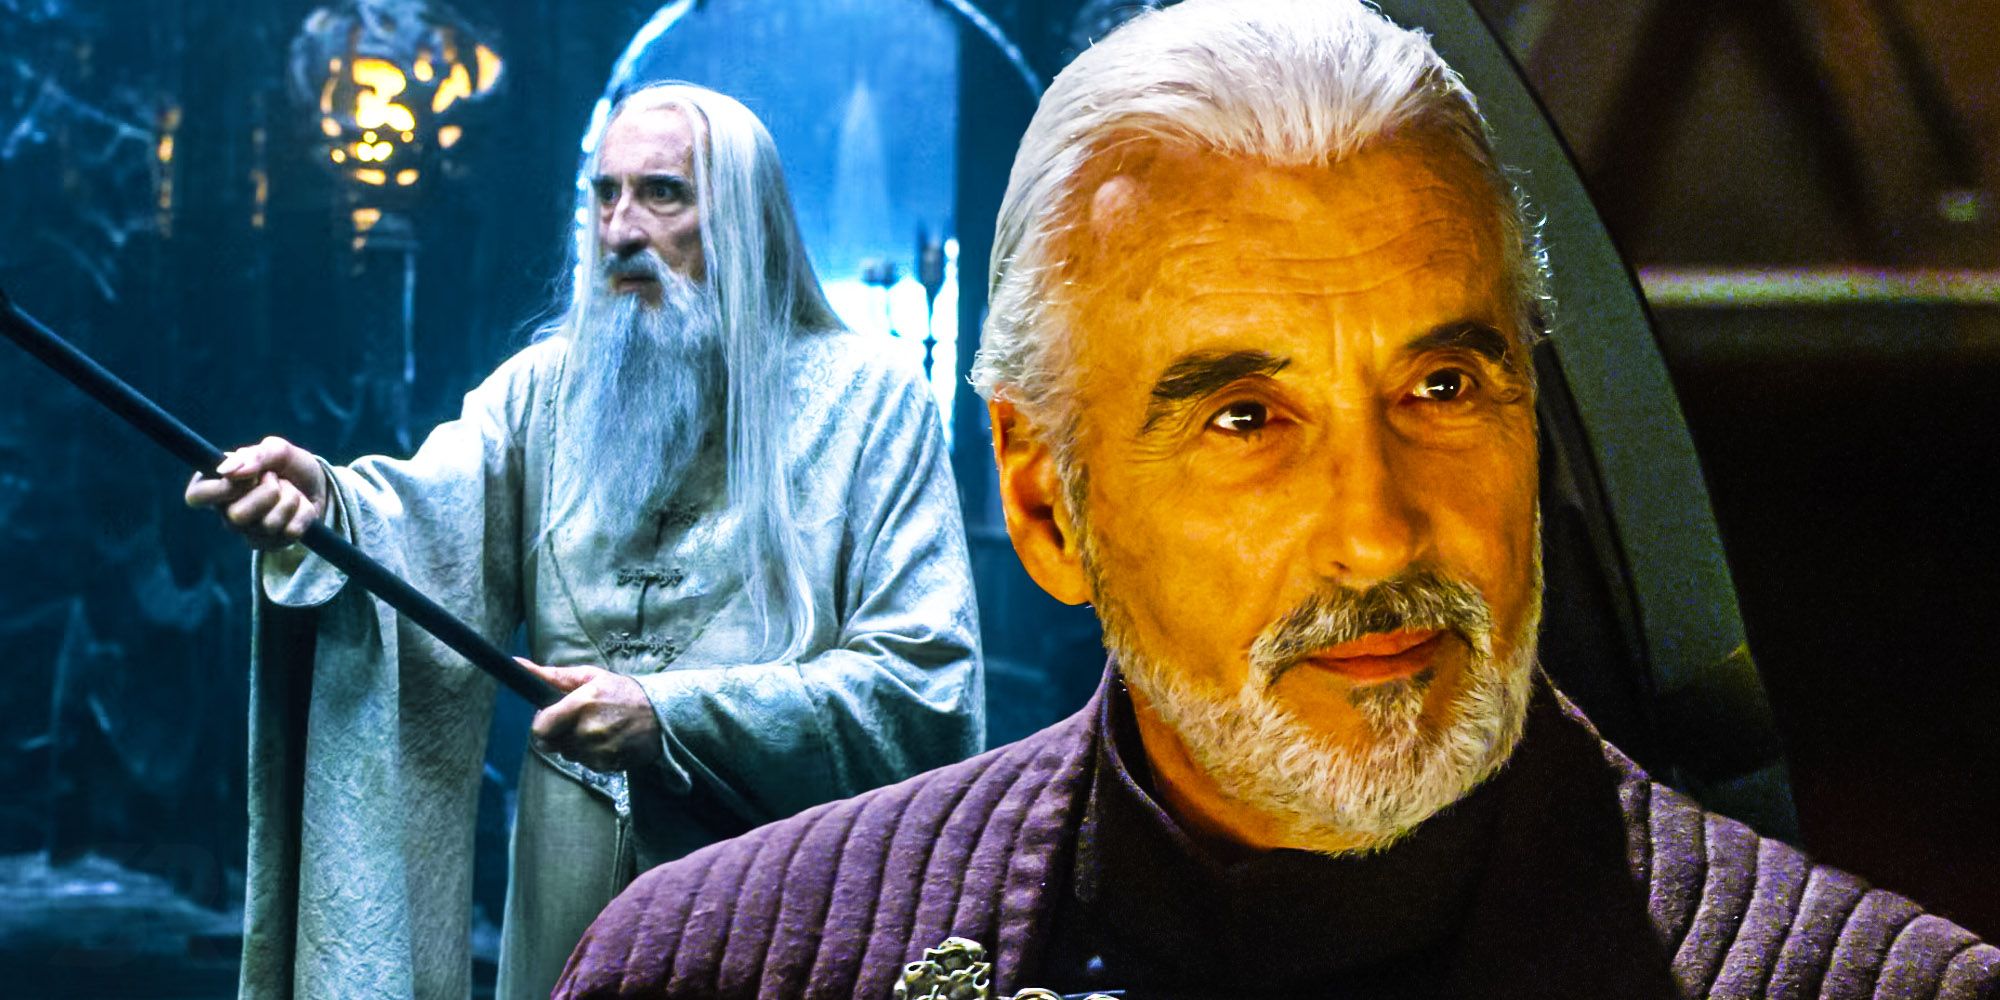 Christopher Lee played Saruman in Lord of the Rings